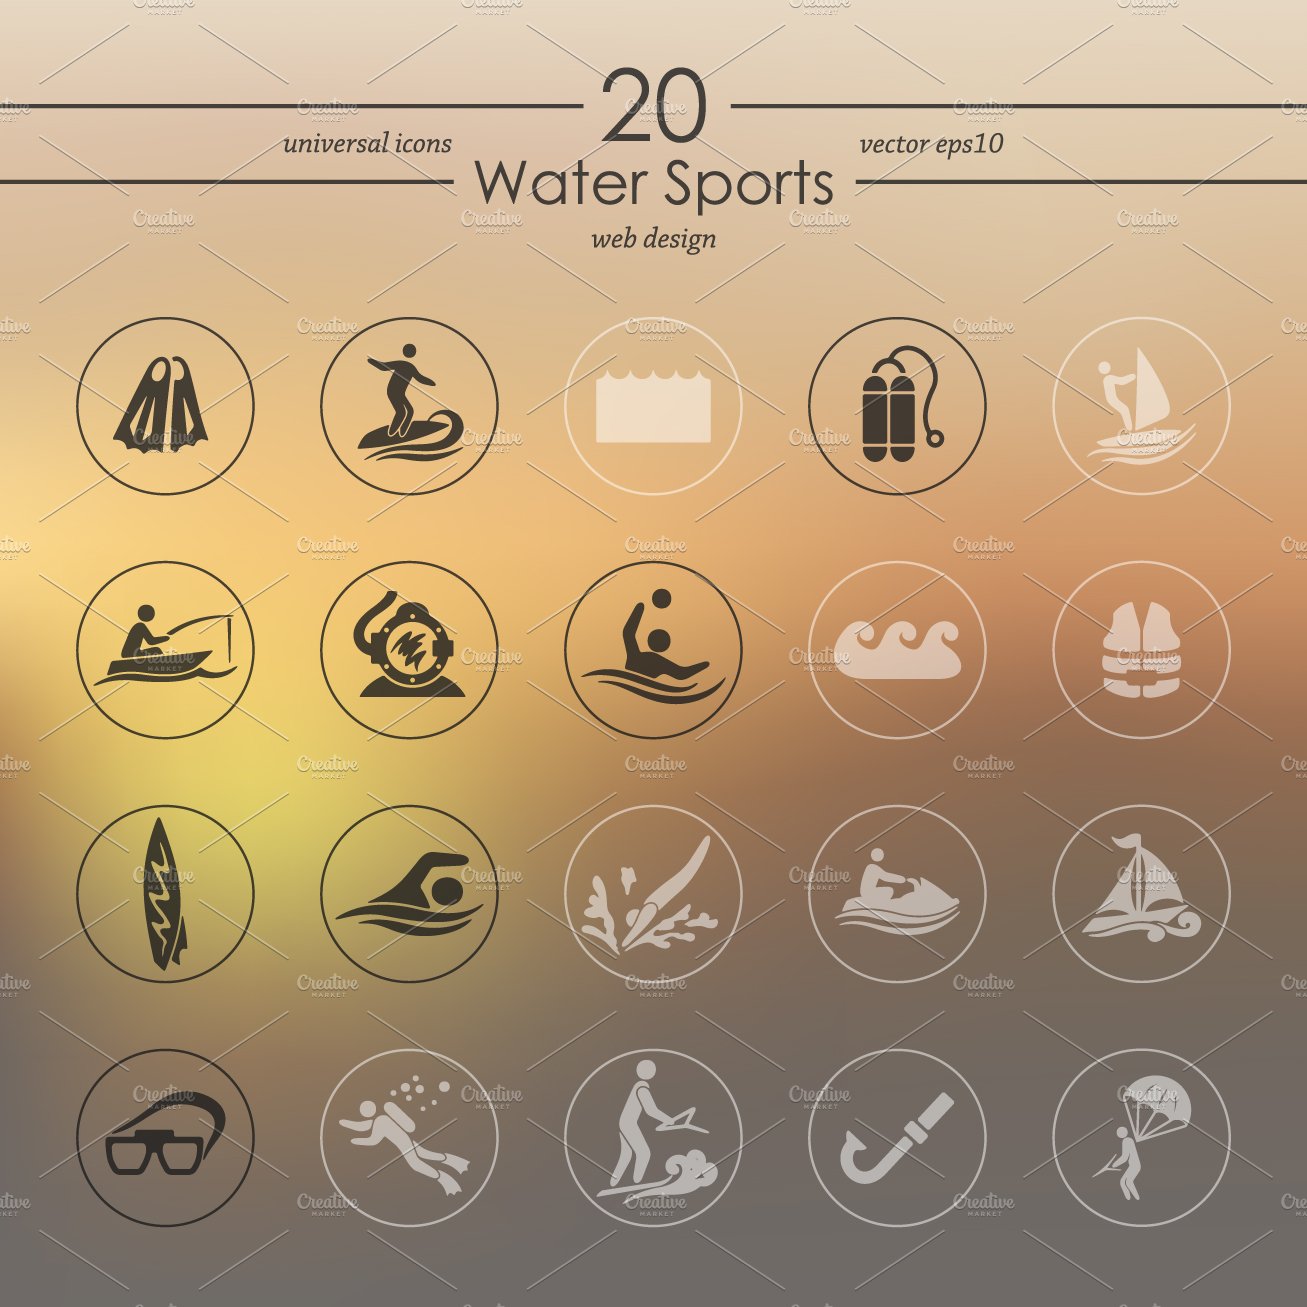 20 WATER SPORTS icons preview image.